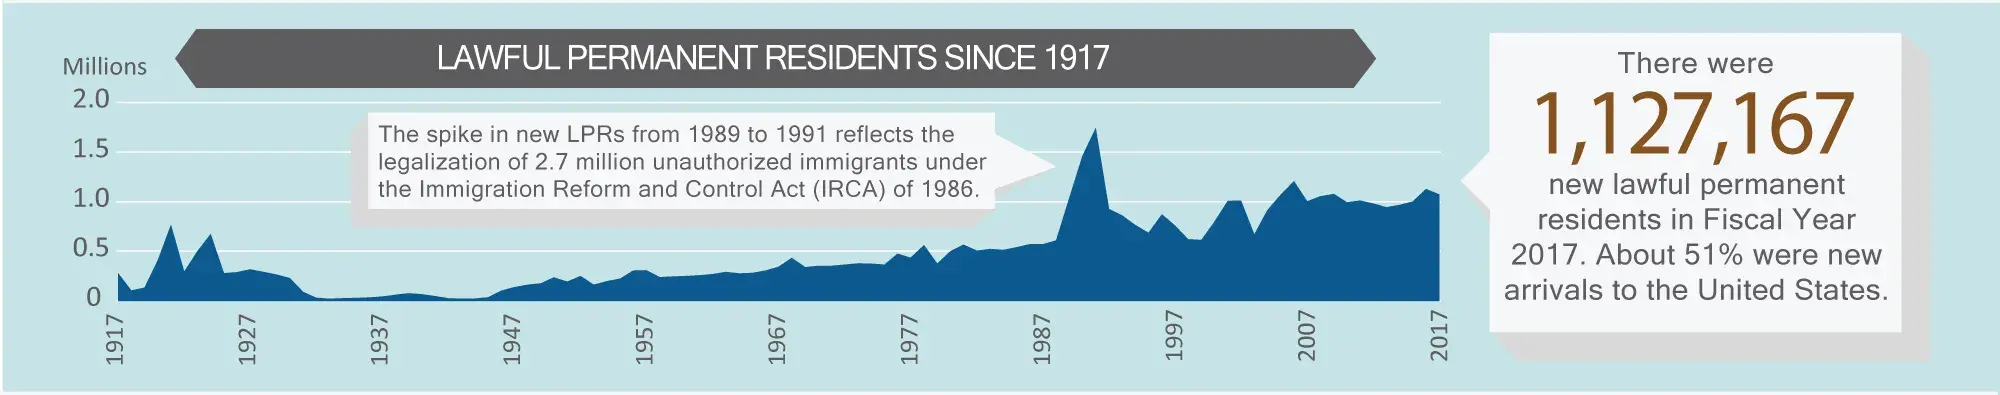 Lawful Permanent Residents since 1917. There were 1,127,167 new LPRs in Fiscal Year 2017. About 51% were new arrivals to the United States. The spike in new LPRs from 1989 to 1991 reflects the legalization of 2.7 million unauthorized immigrants under the Immigration Reform and Control Act (IRCA) of 1986.